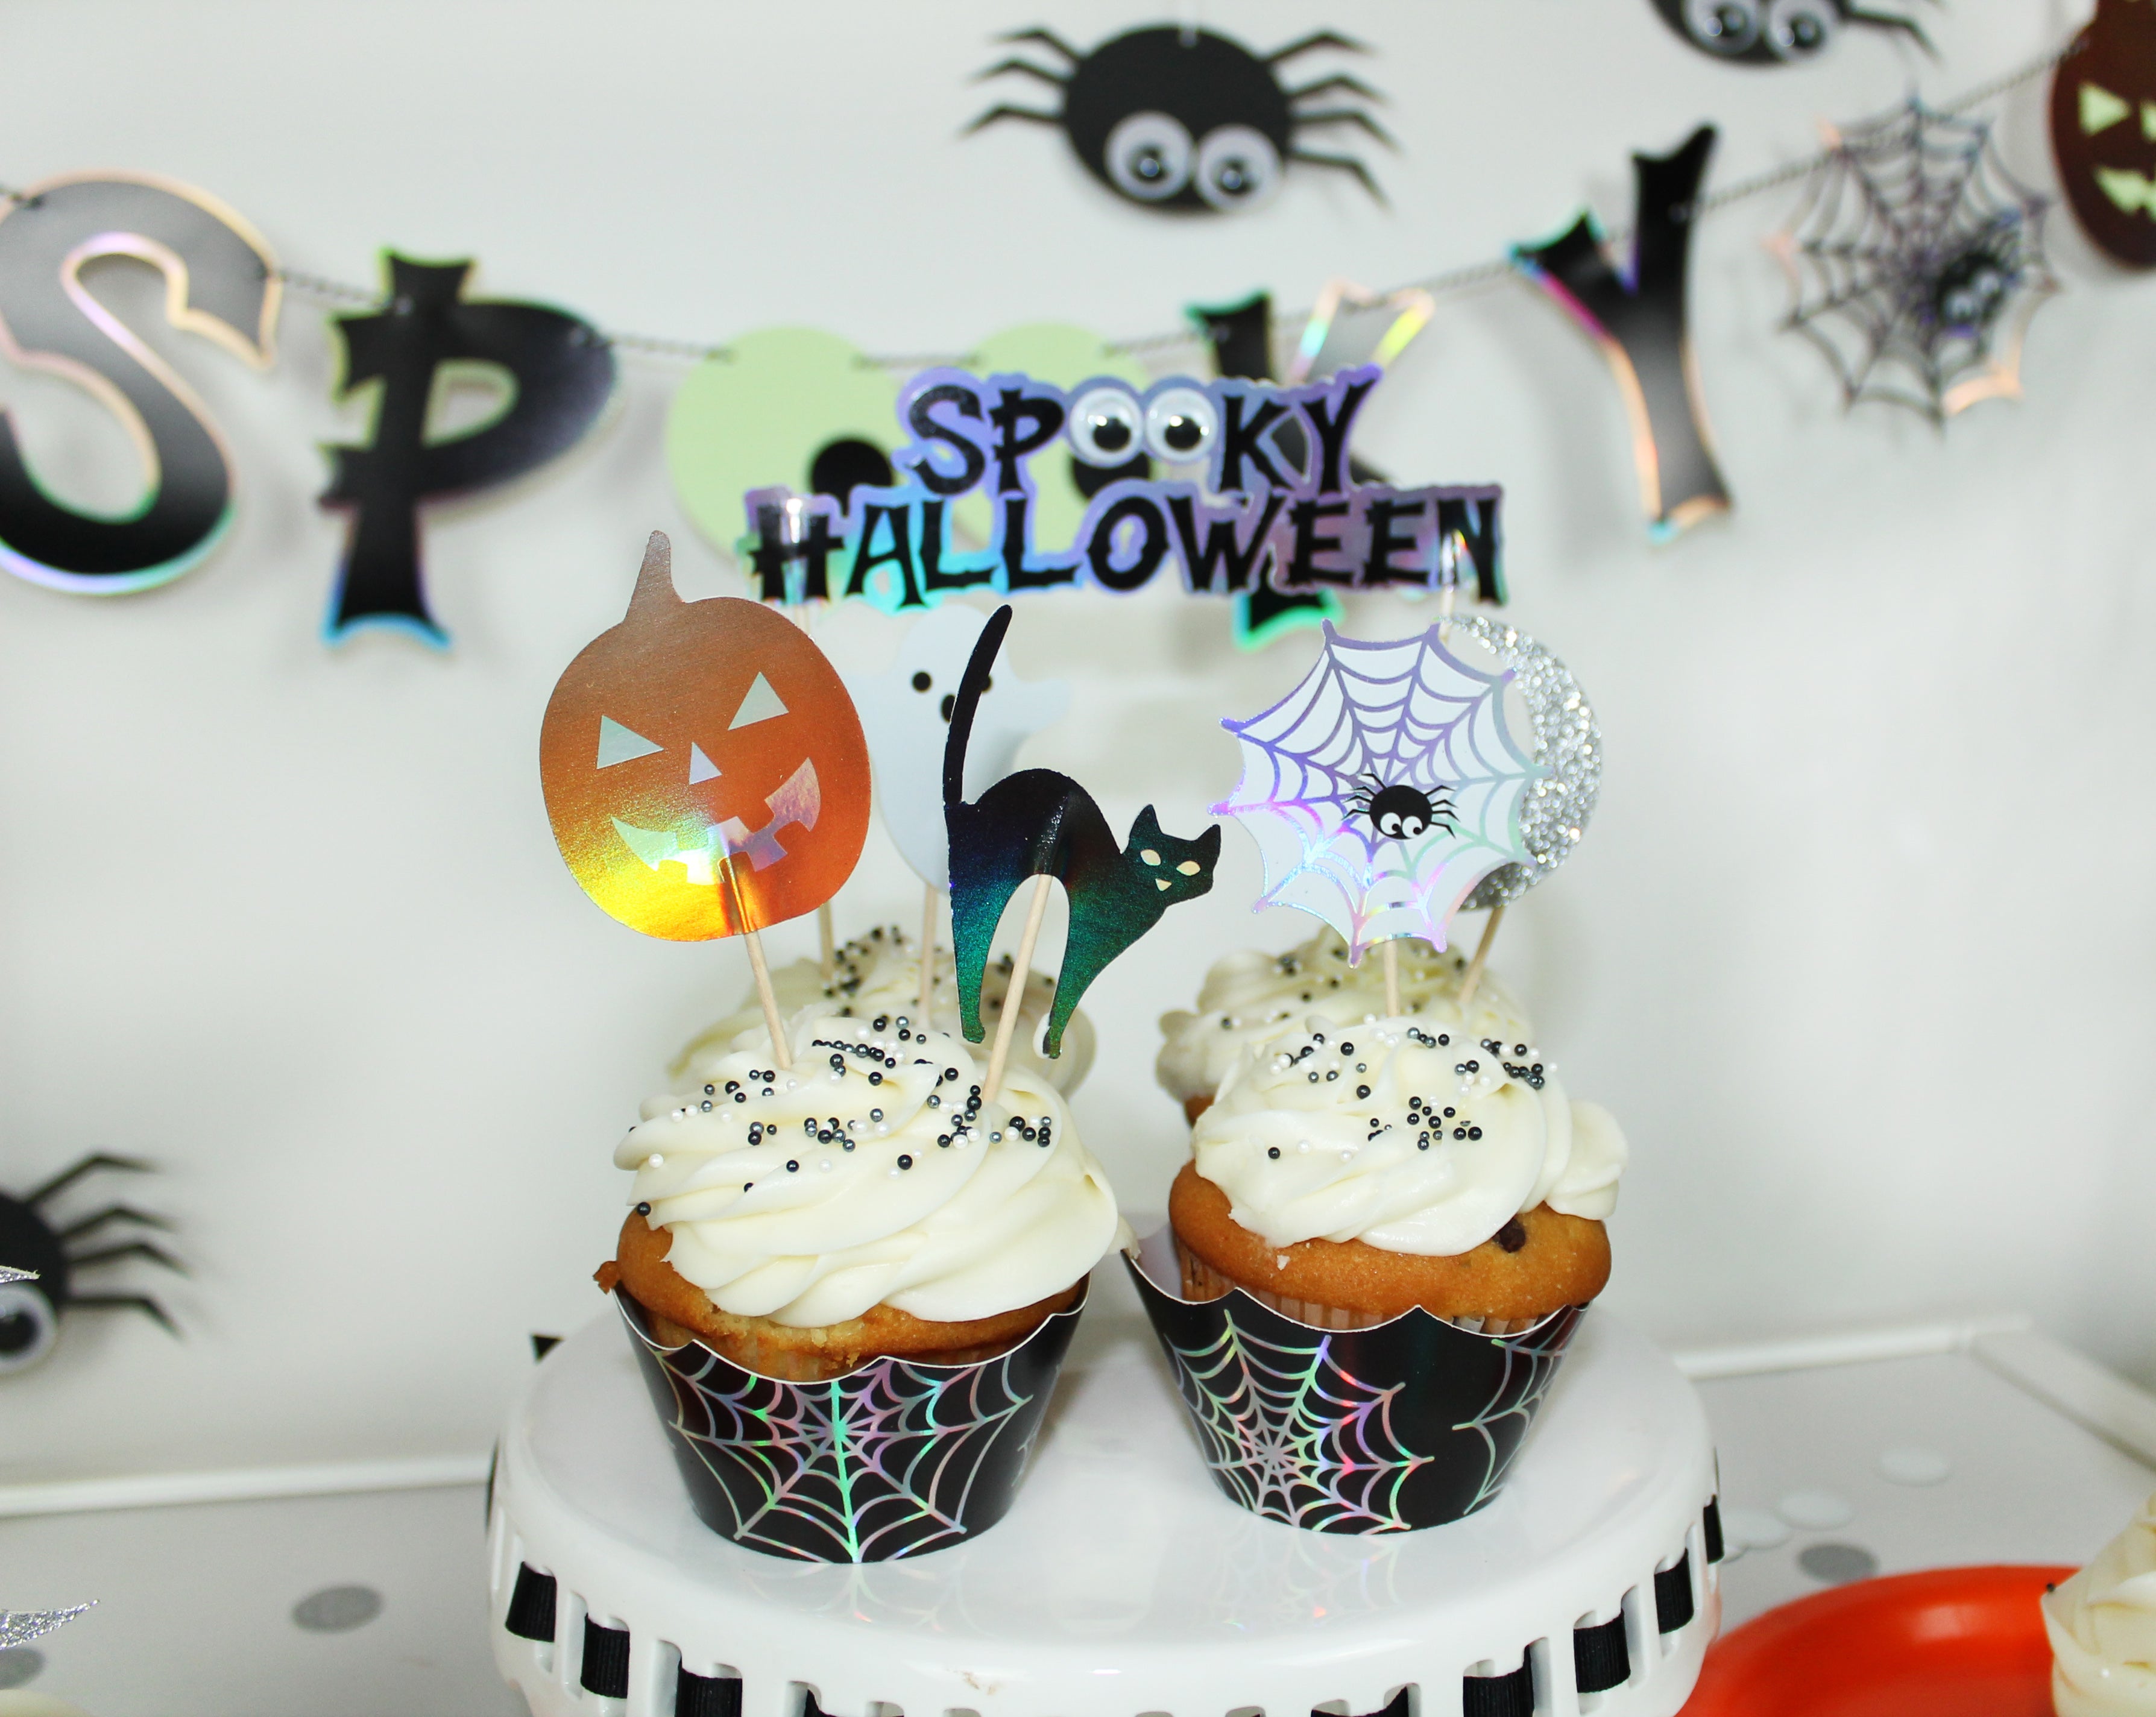 Spooky Halloween - Cupcake Toppers & Wrappers, 11 Ct